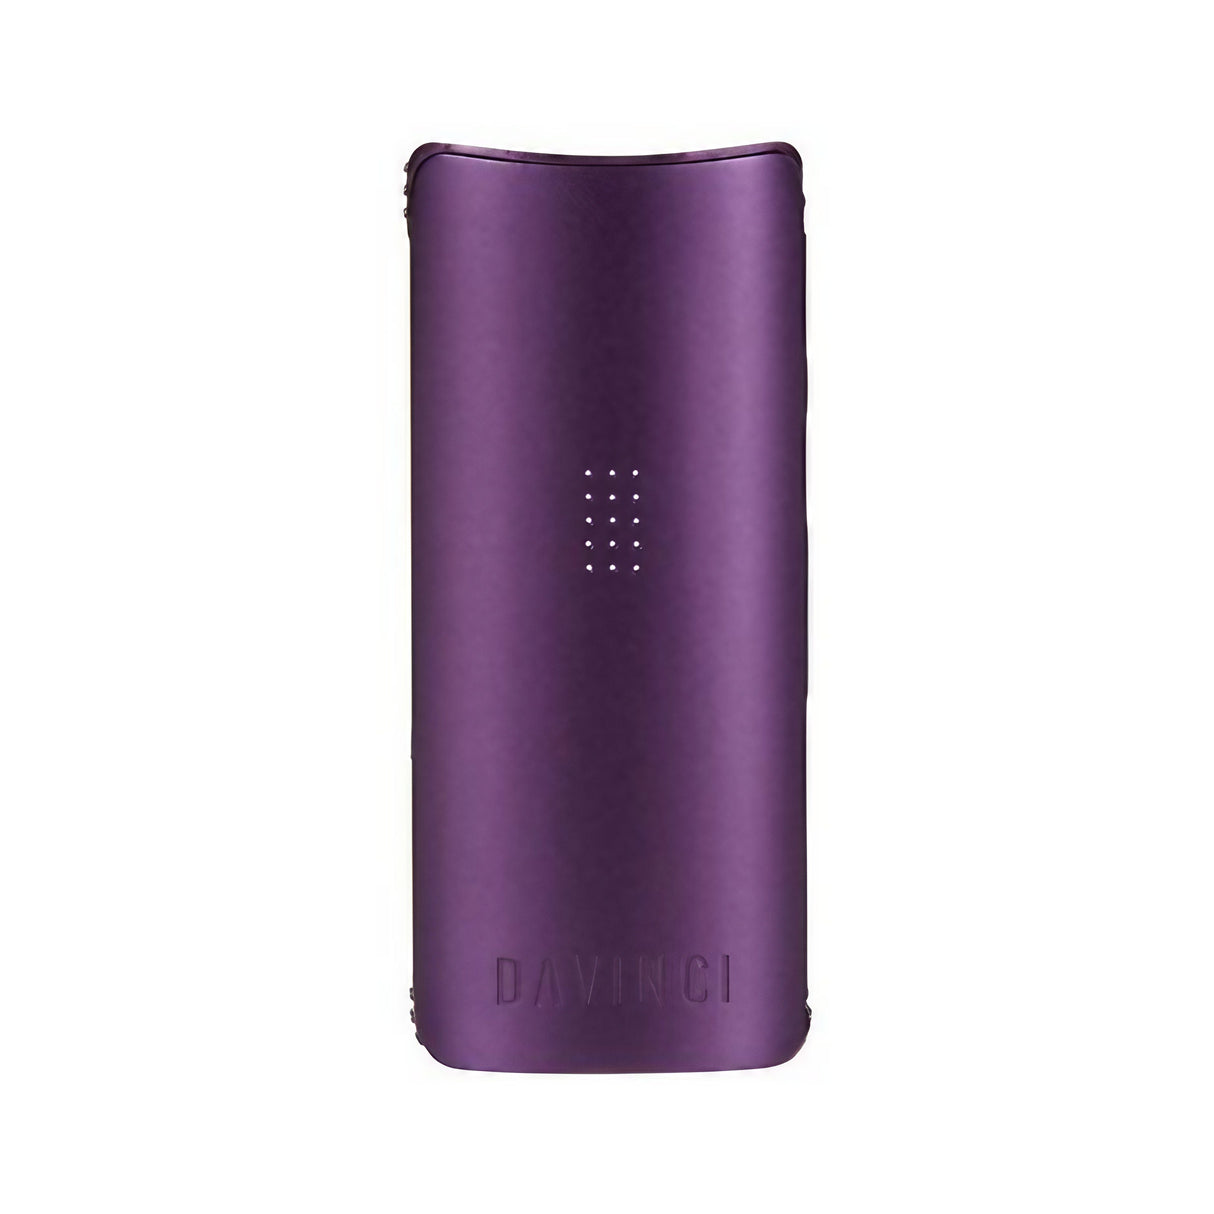 DaVinci MIQRO Vaporizer in purple, compact ceramic design for dry herbs, front view on white background